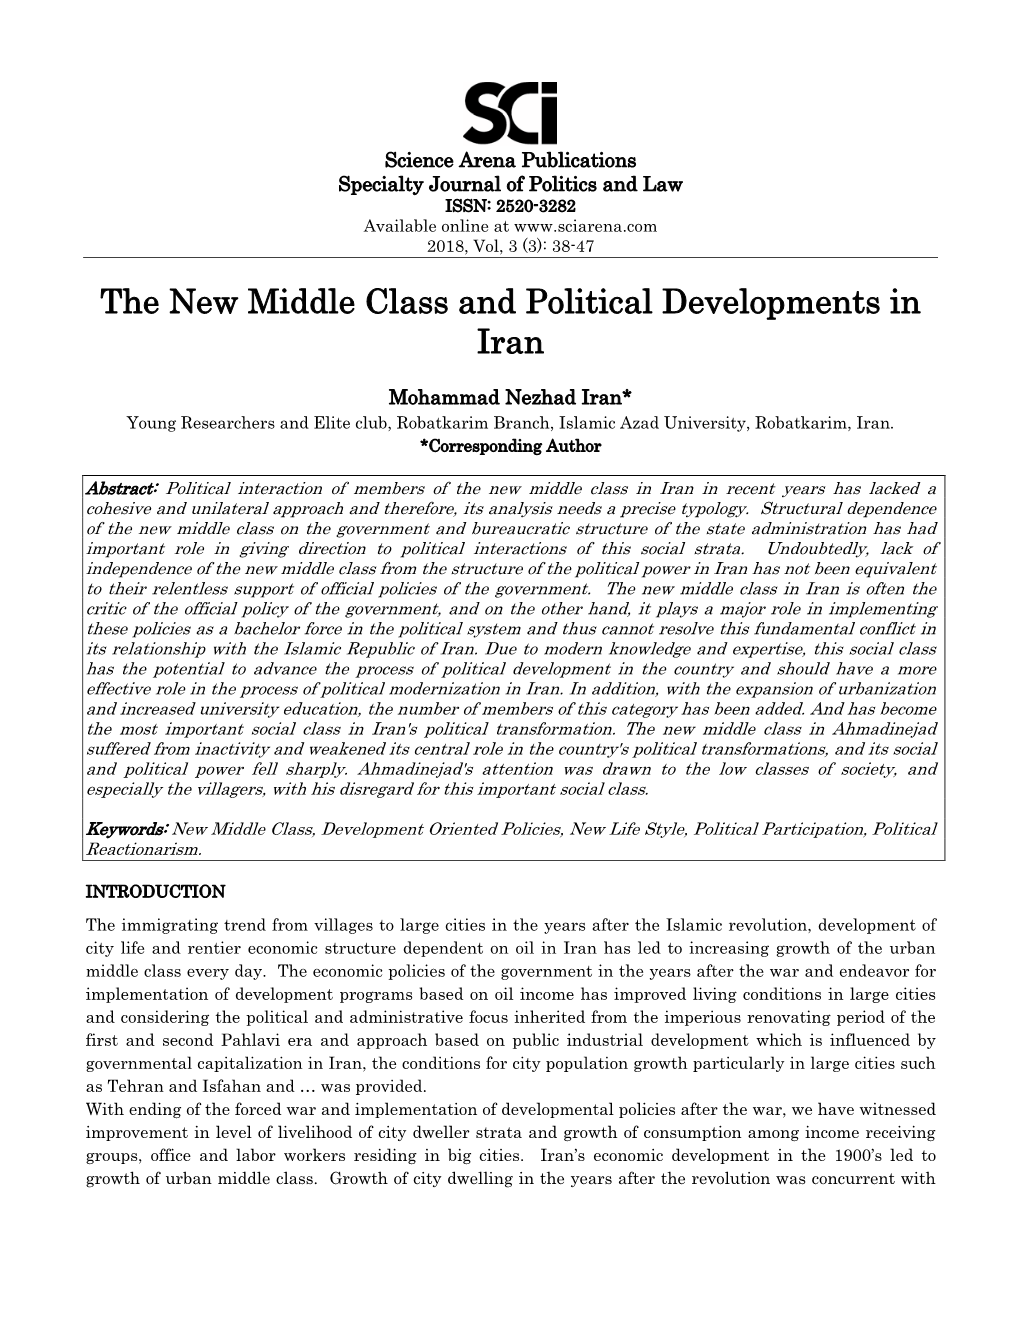 The New Middle Class and Political Developments in Iran